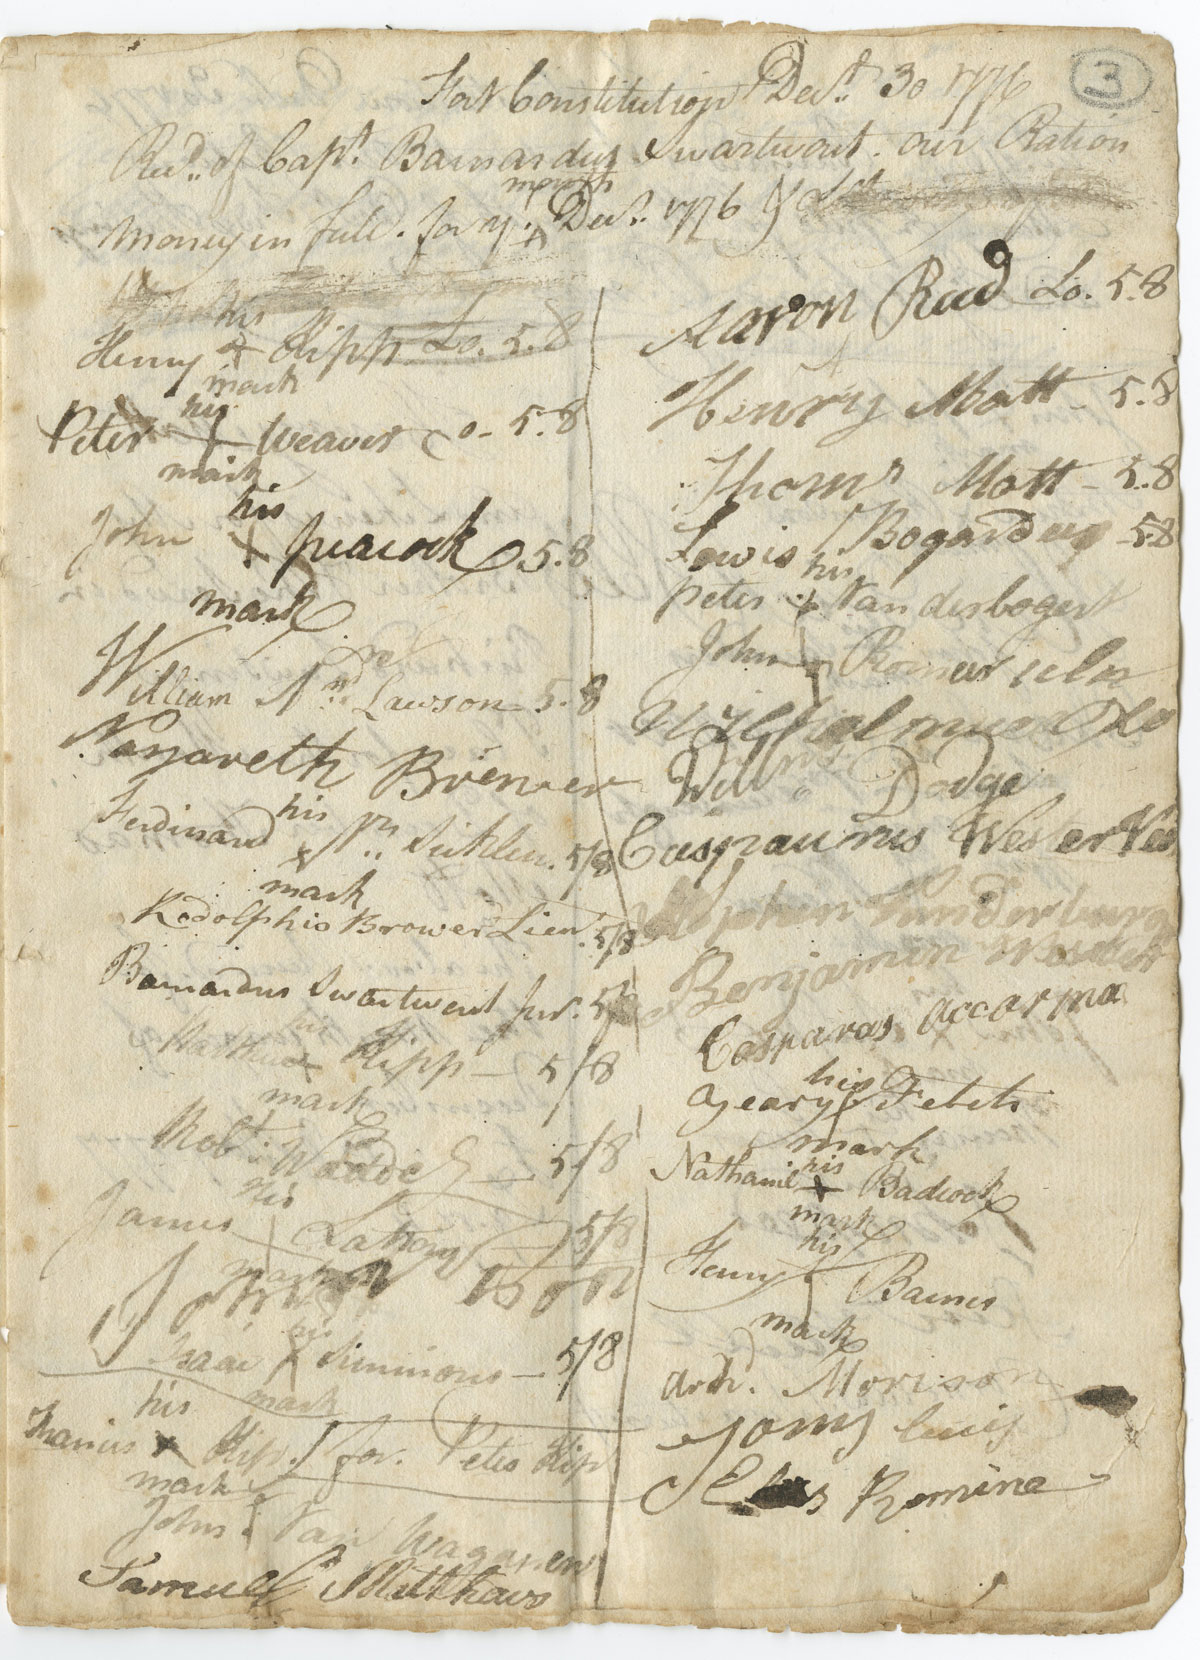 Dutchess County Militia Members Receive Their Pay In December 1776